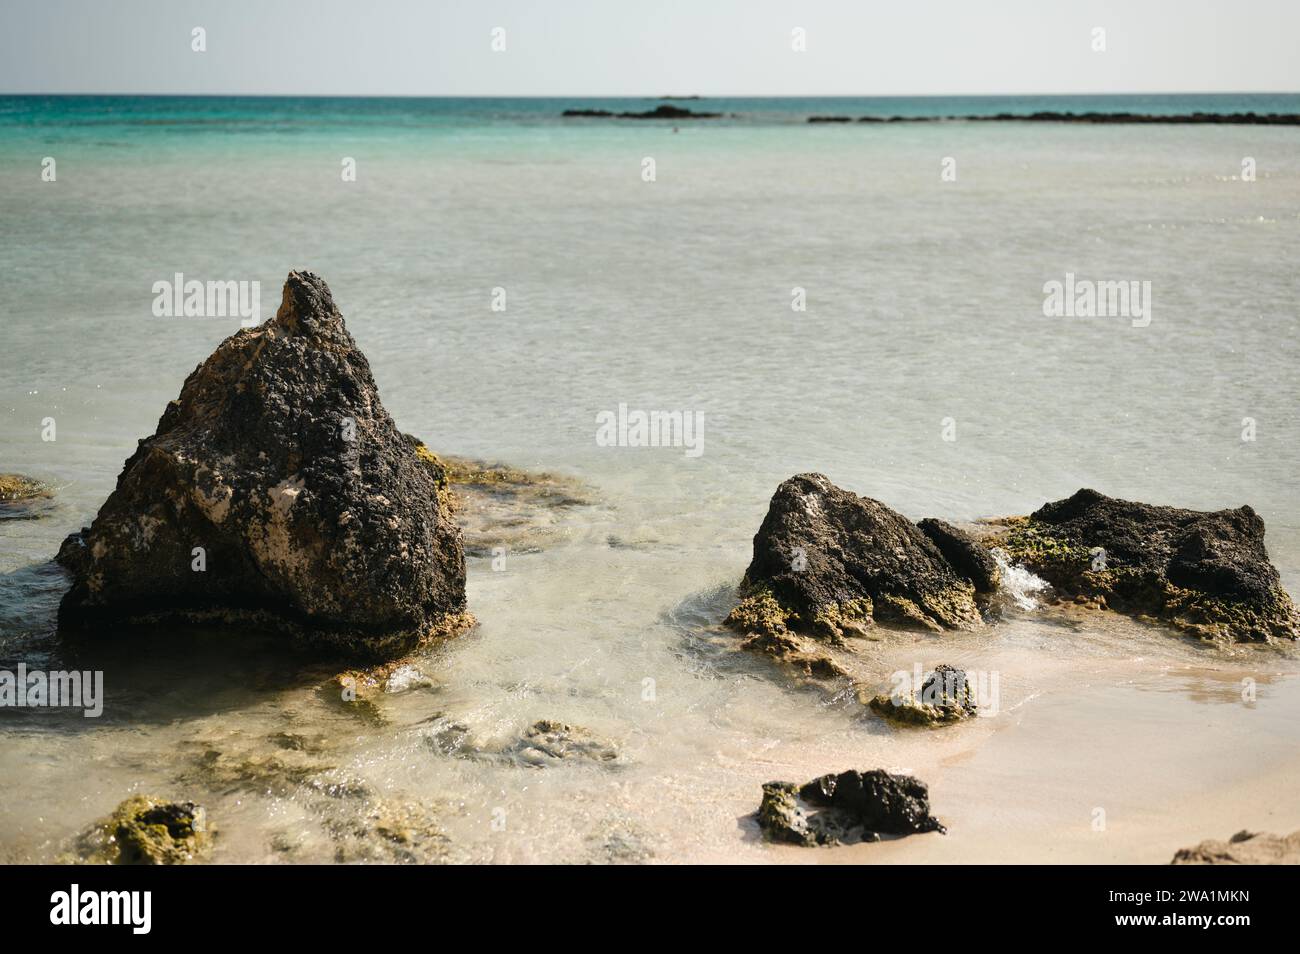 Rock formations at Elafonissi Beach on the island of Crete Stock Photo